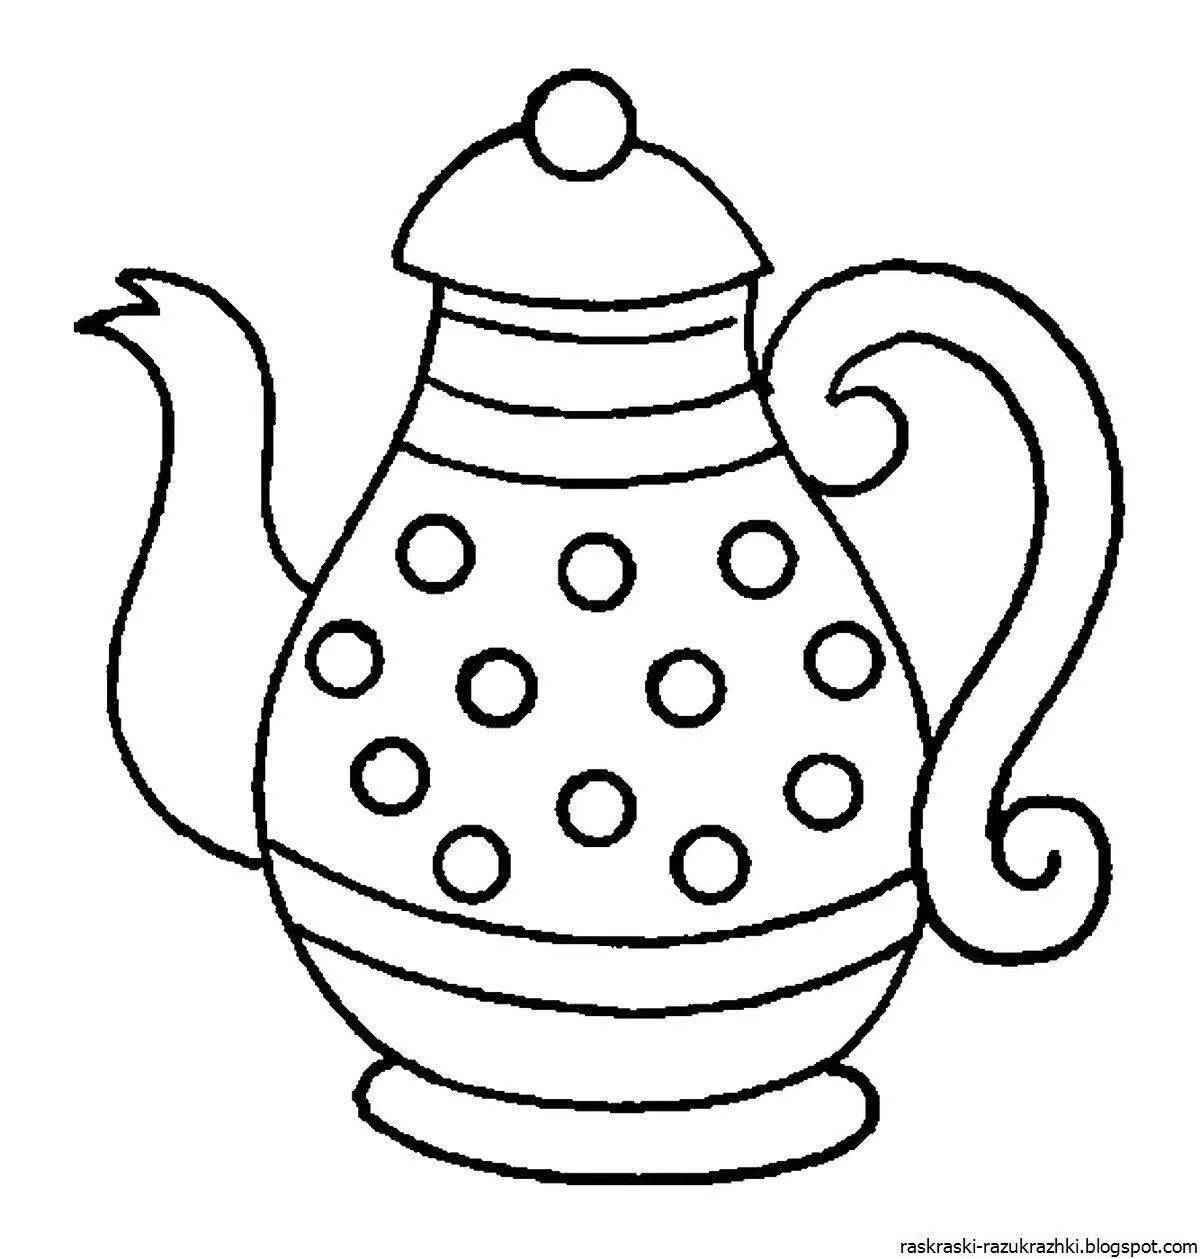 Sweet teapot coloring page